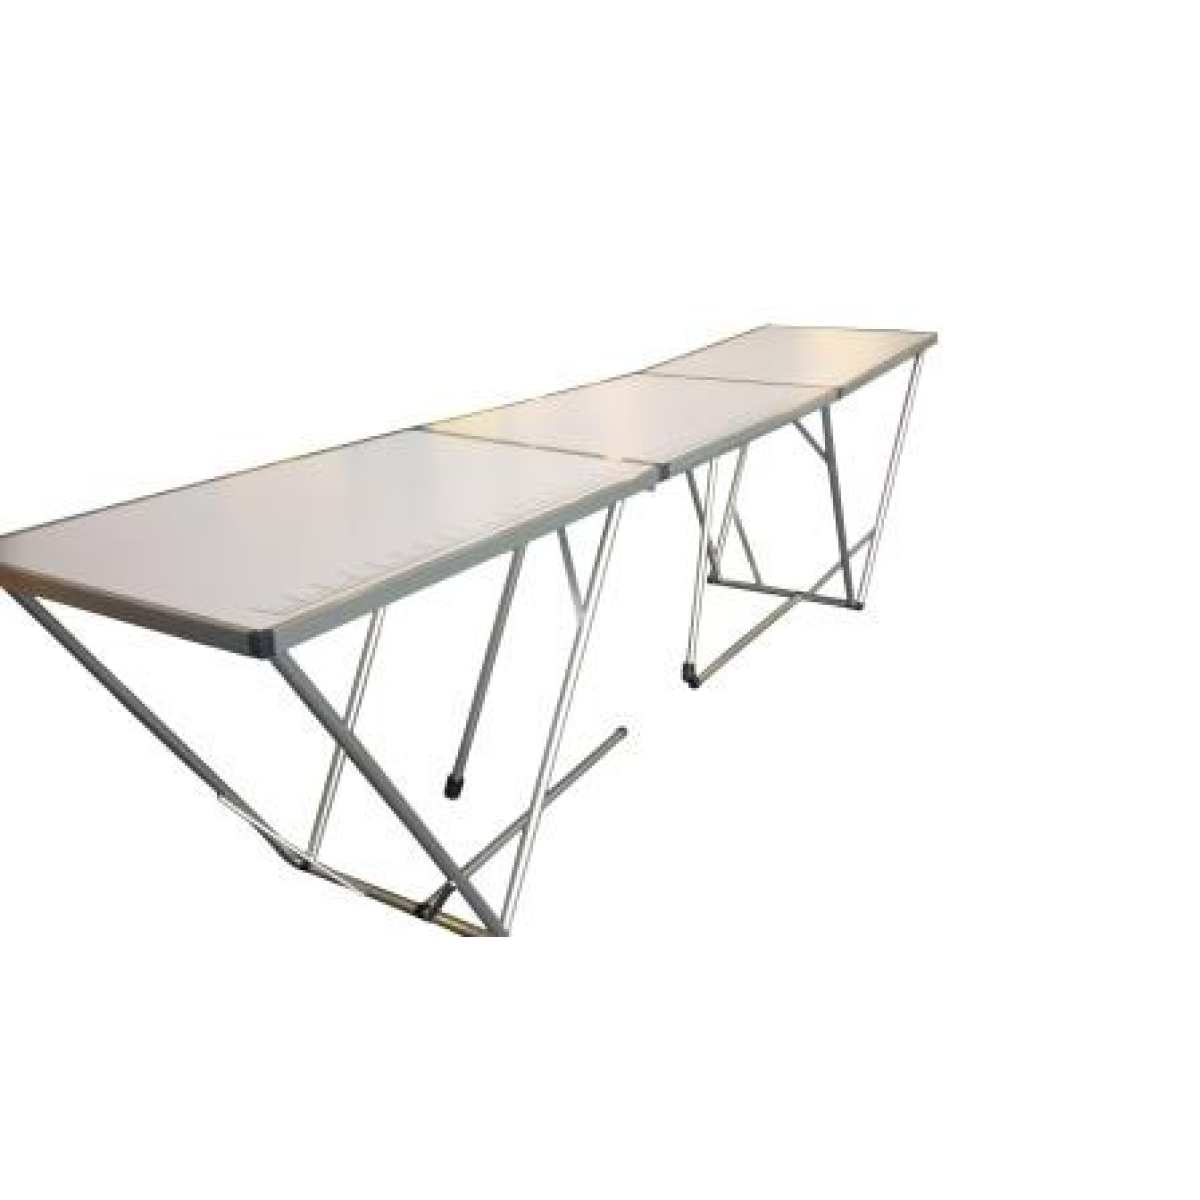 Wallpapering Table 600mm x 3m